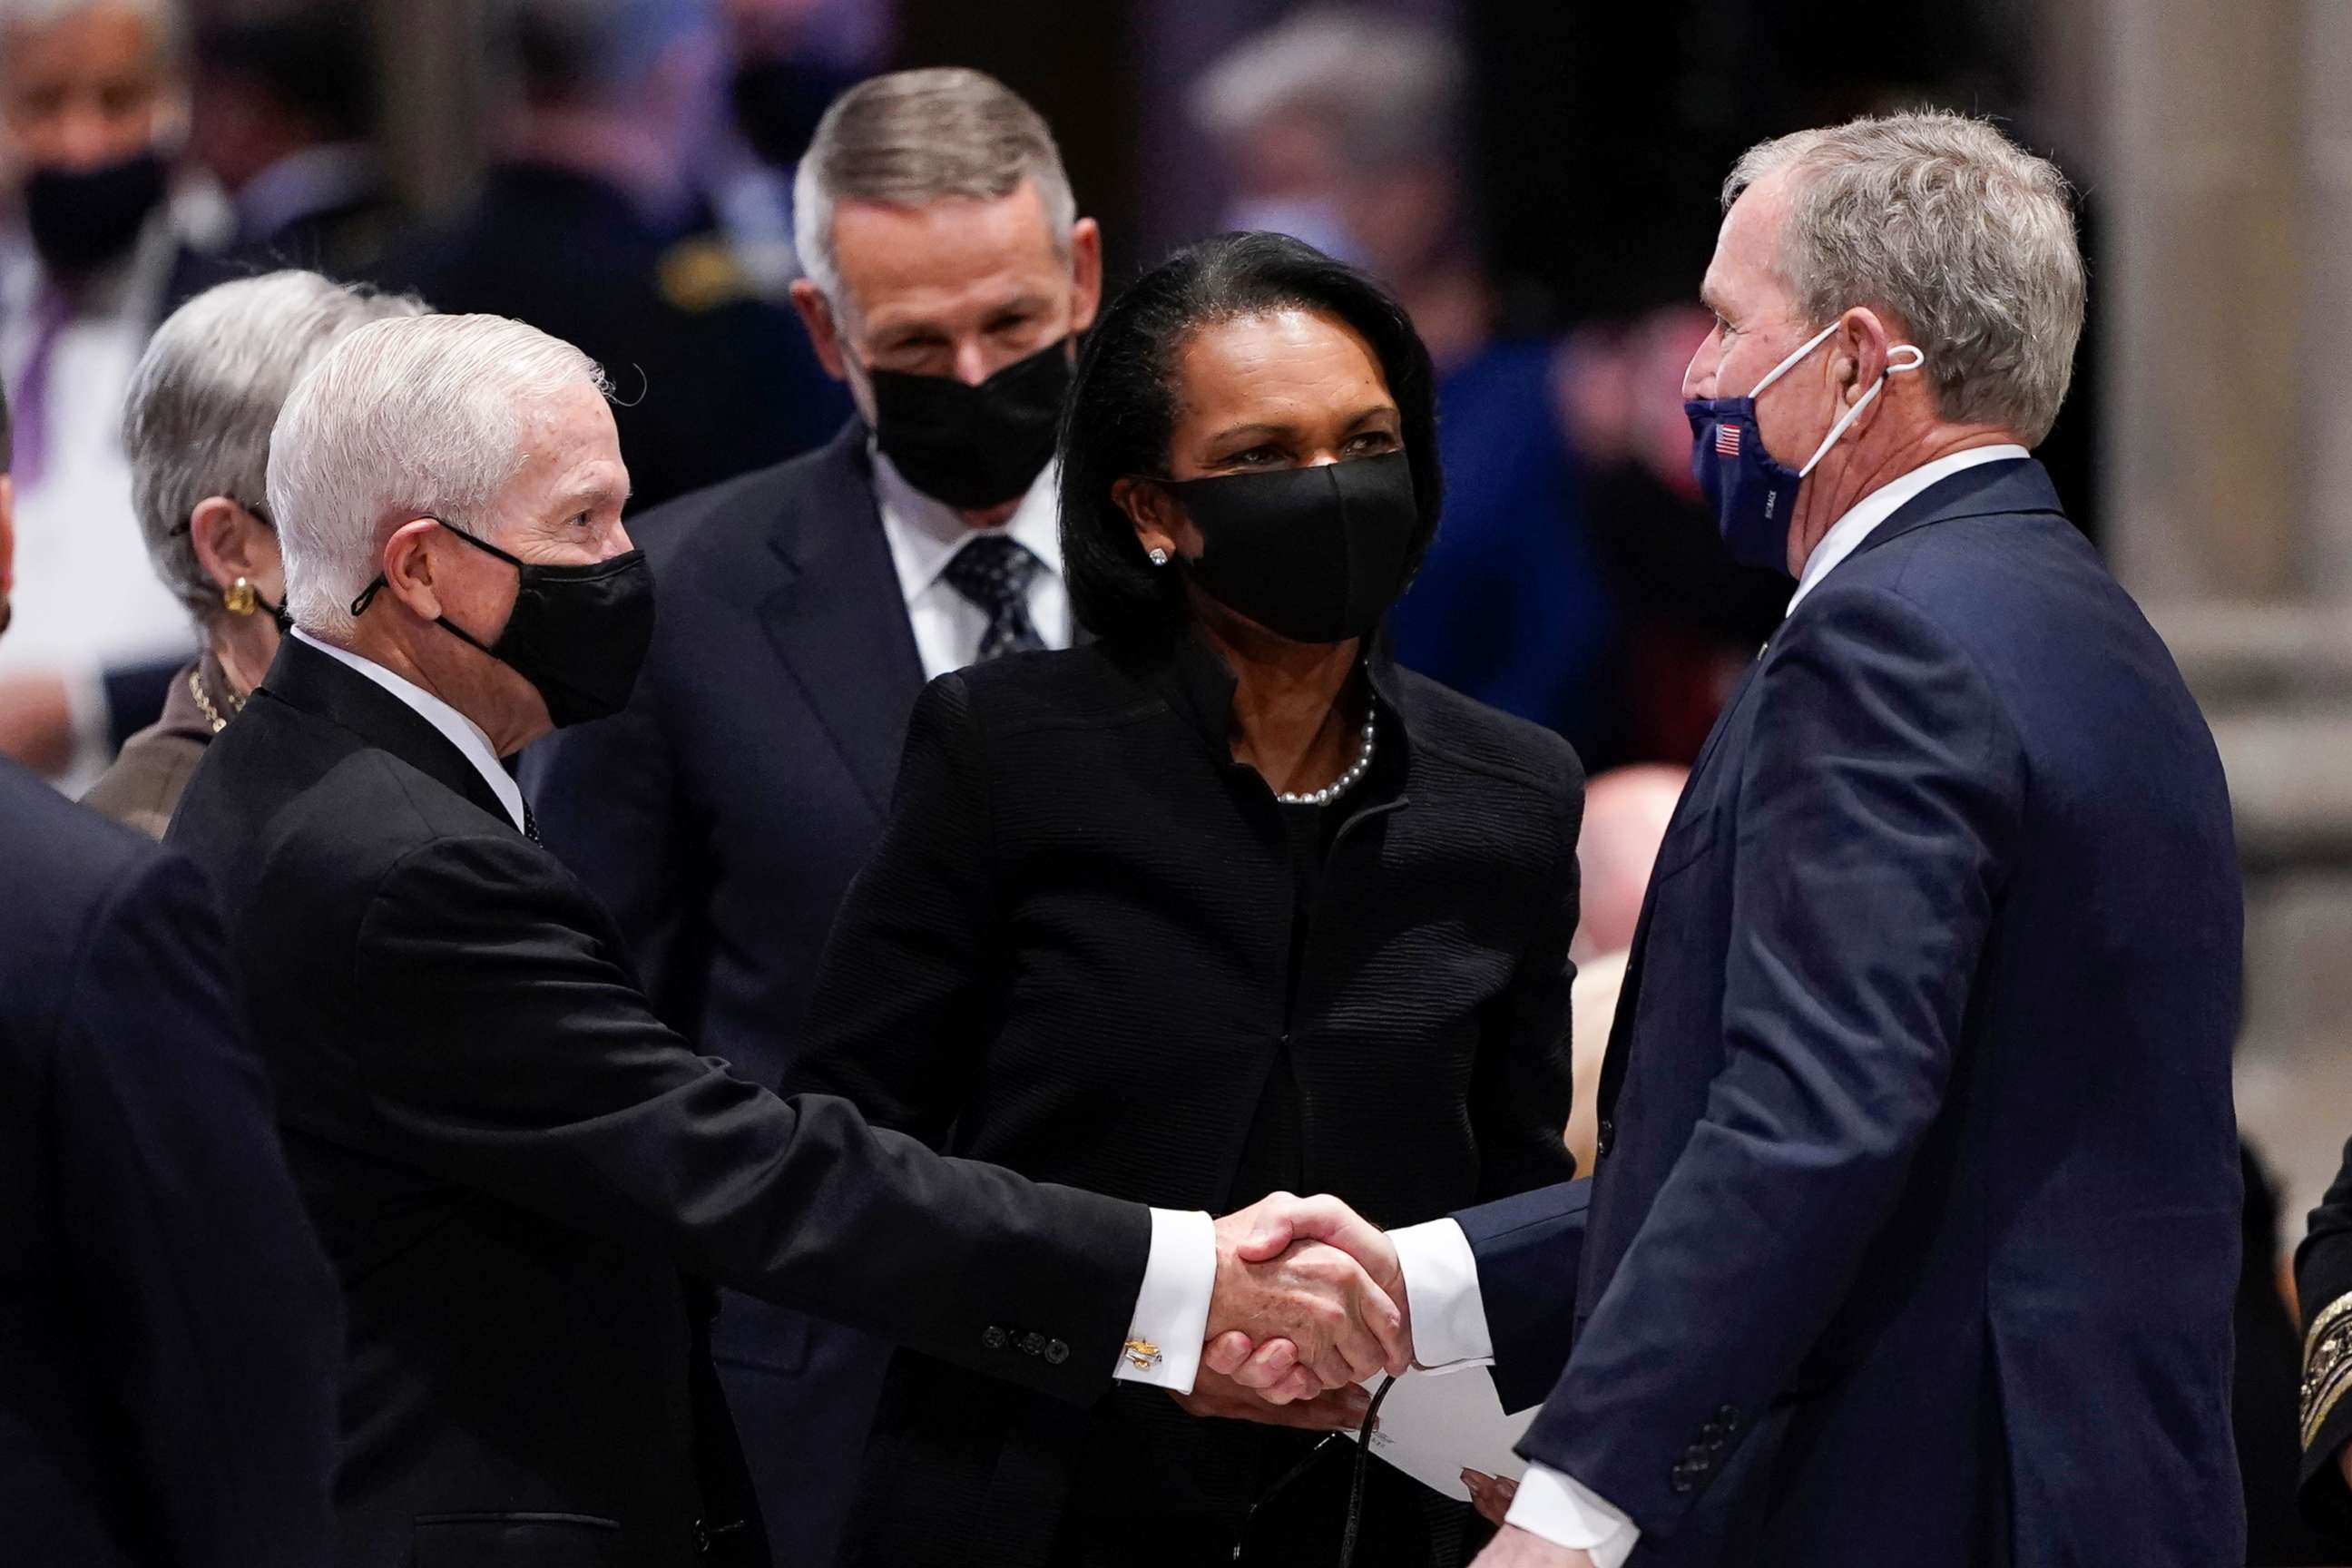 PHOTO: Former President George W. Bush greets former CIA director Robert Gates, left, as former Secretary of State Condoleezza Rice and former Joint Chiefs Chairman Peter Pace, right, watch before a funeral for former Secretary of State Colin Powell.